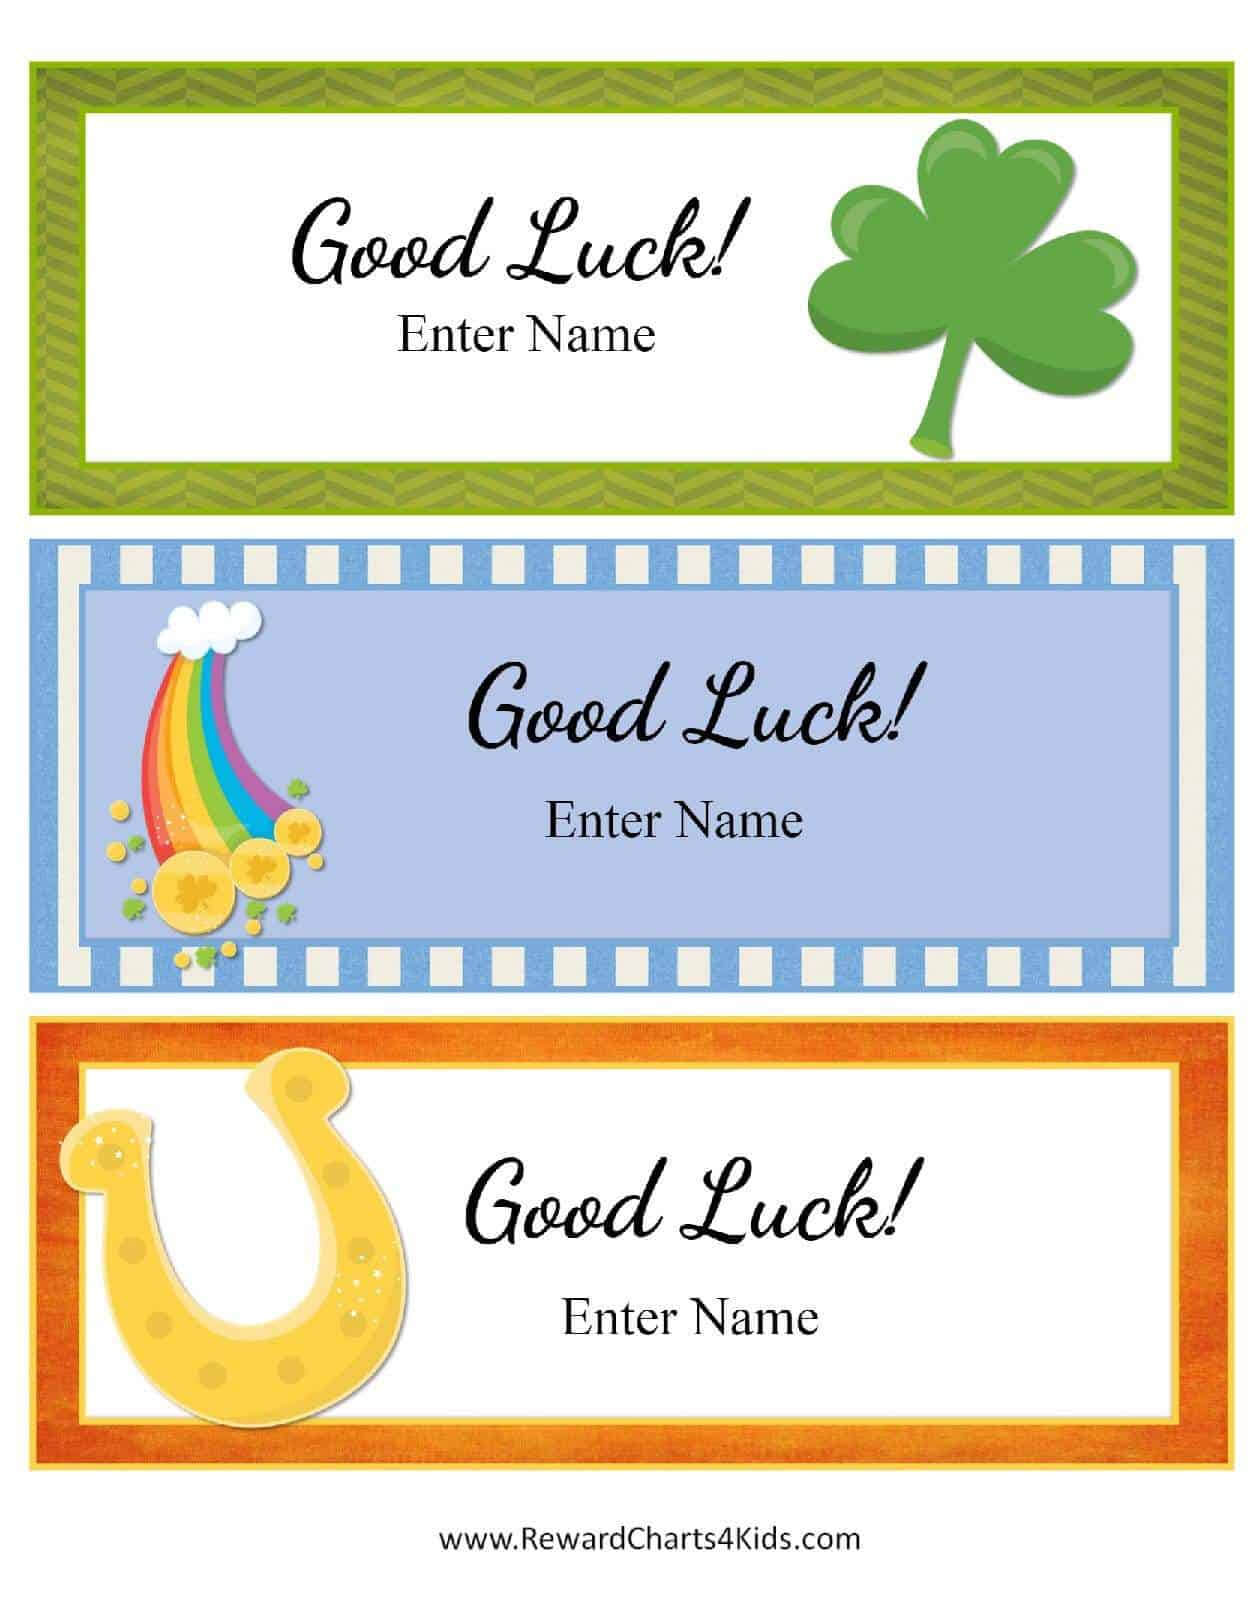 Free Good Luck Cards For Kids | Customize Online & Print At Home Throughout Good Luck Card Template